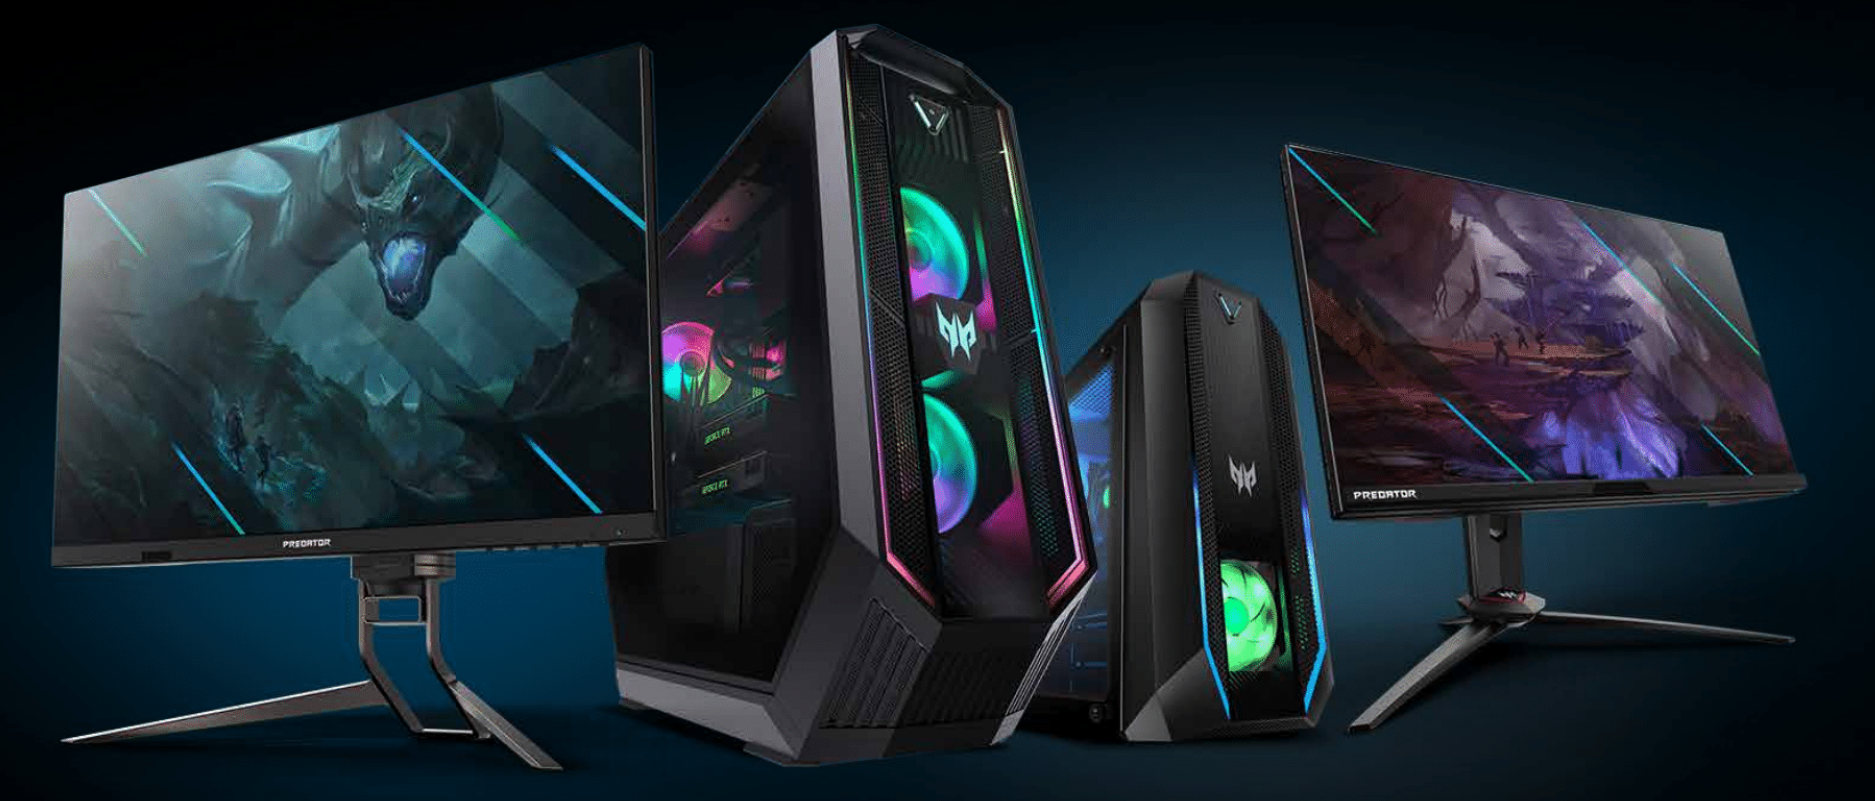 hybride Demon aanvaardbaar Acer's Nitro 50 gaming desktop is now available with 10th-generation Intel  Comet Lake CPUs, an NVIDIA GeForce RTX 2060 Super GPU, and more -  NotebookCheck.net News